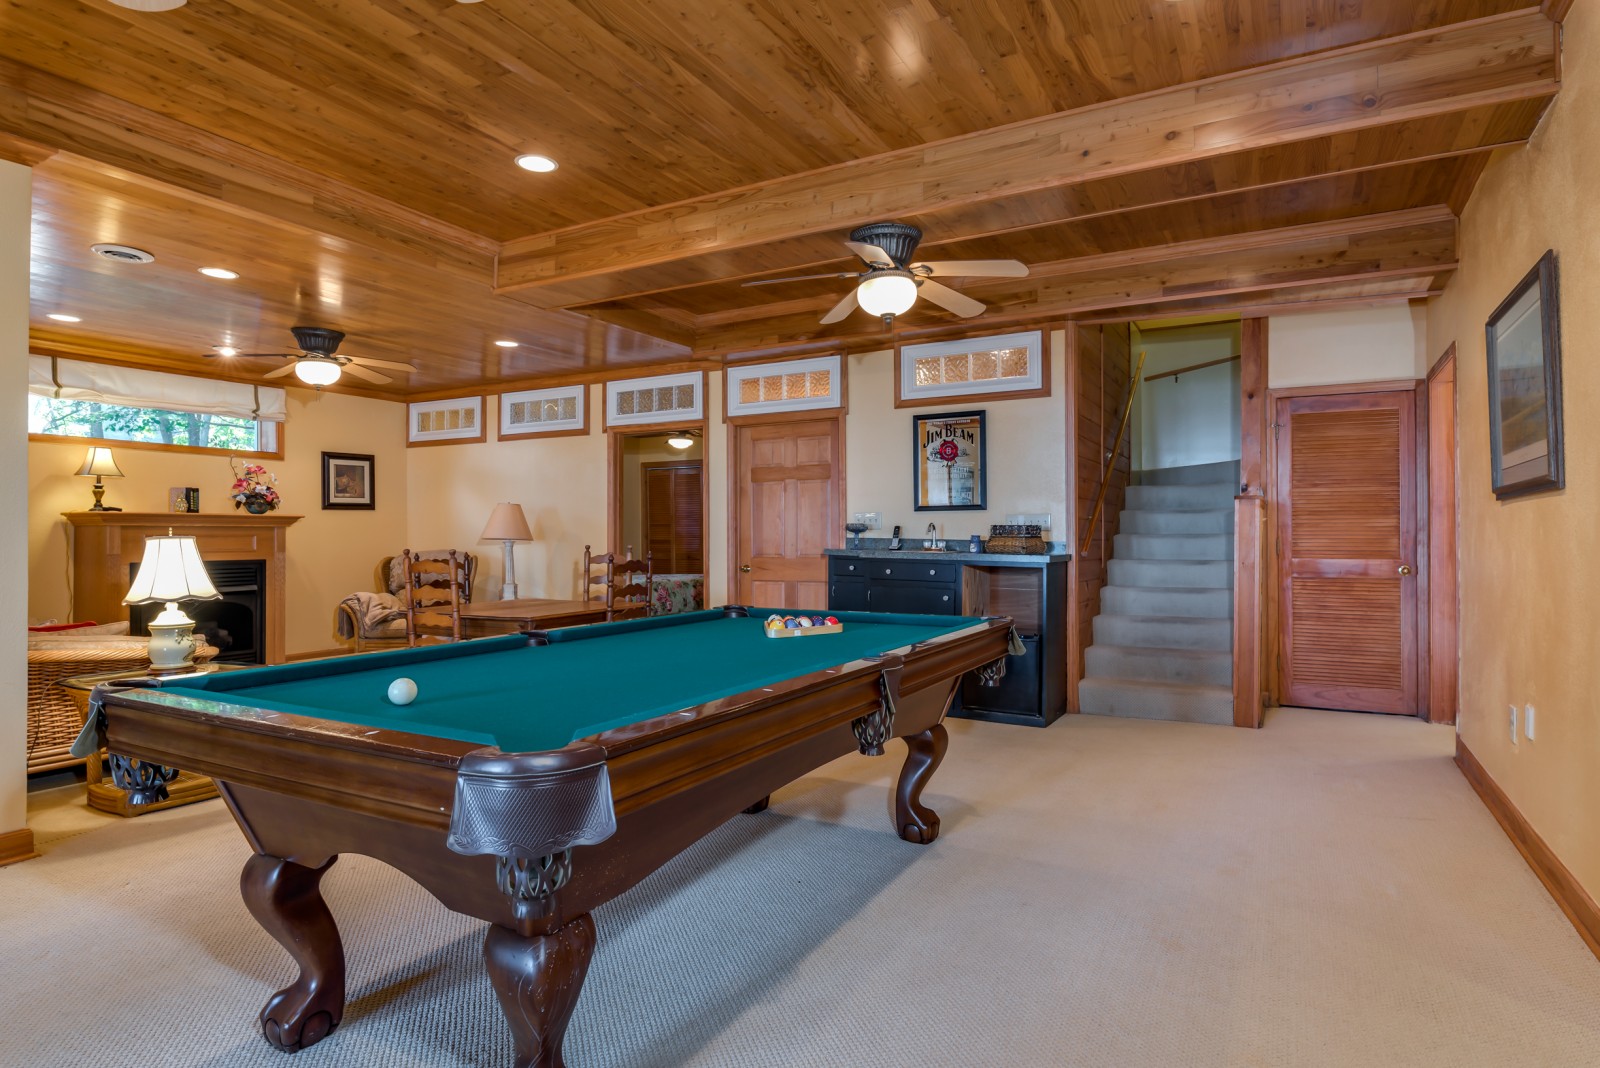 Downstairs view of pool table